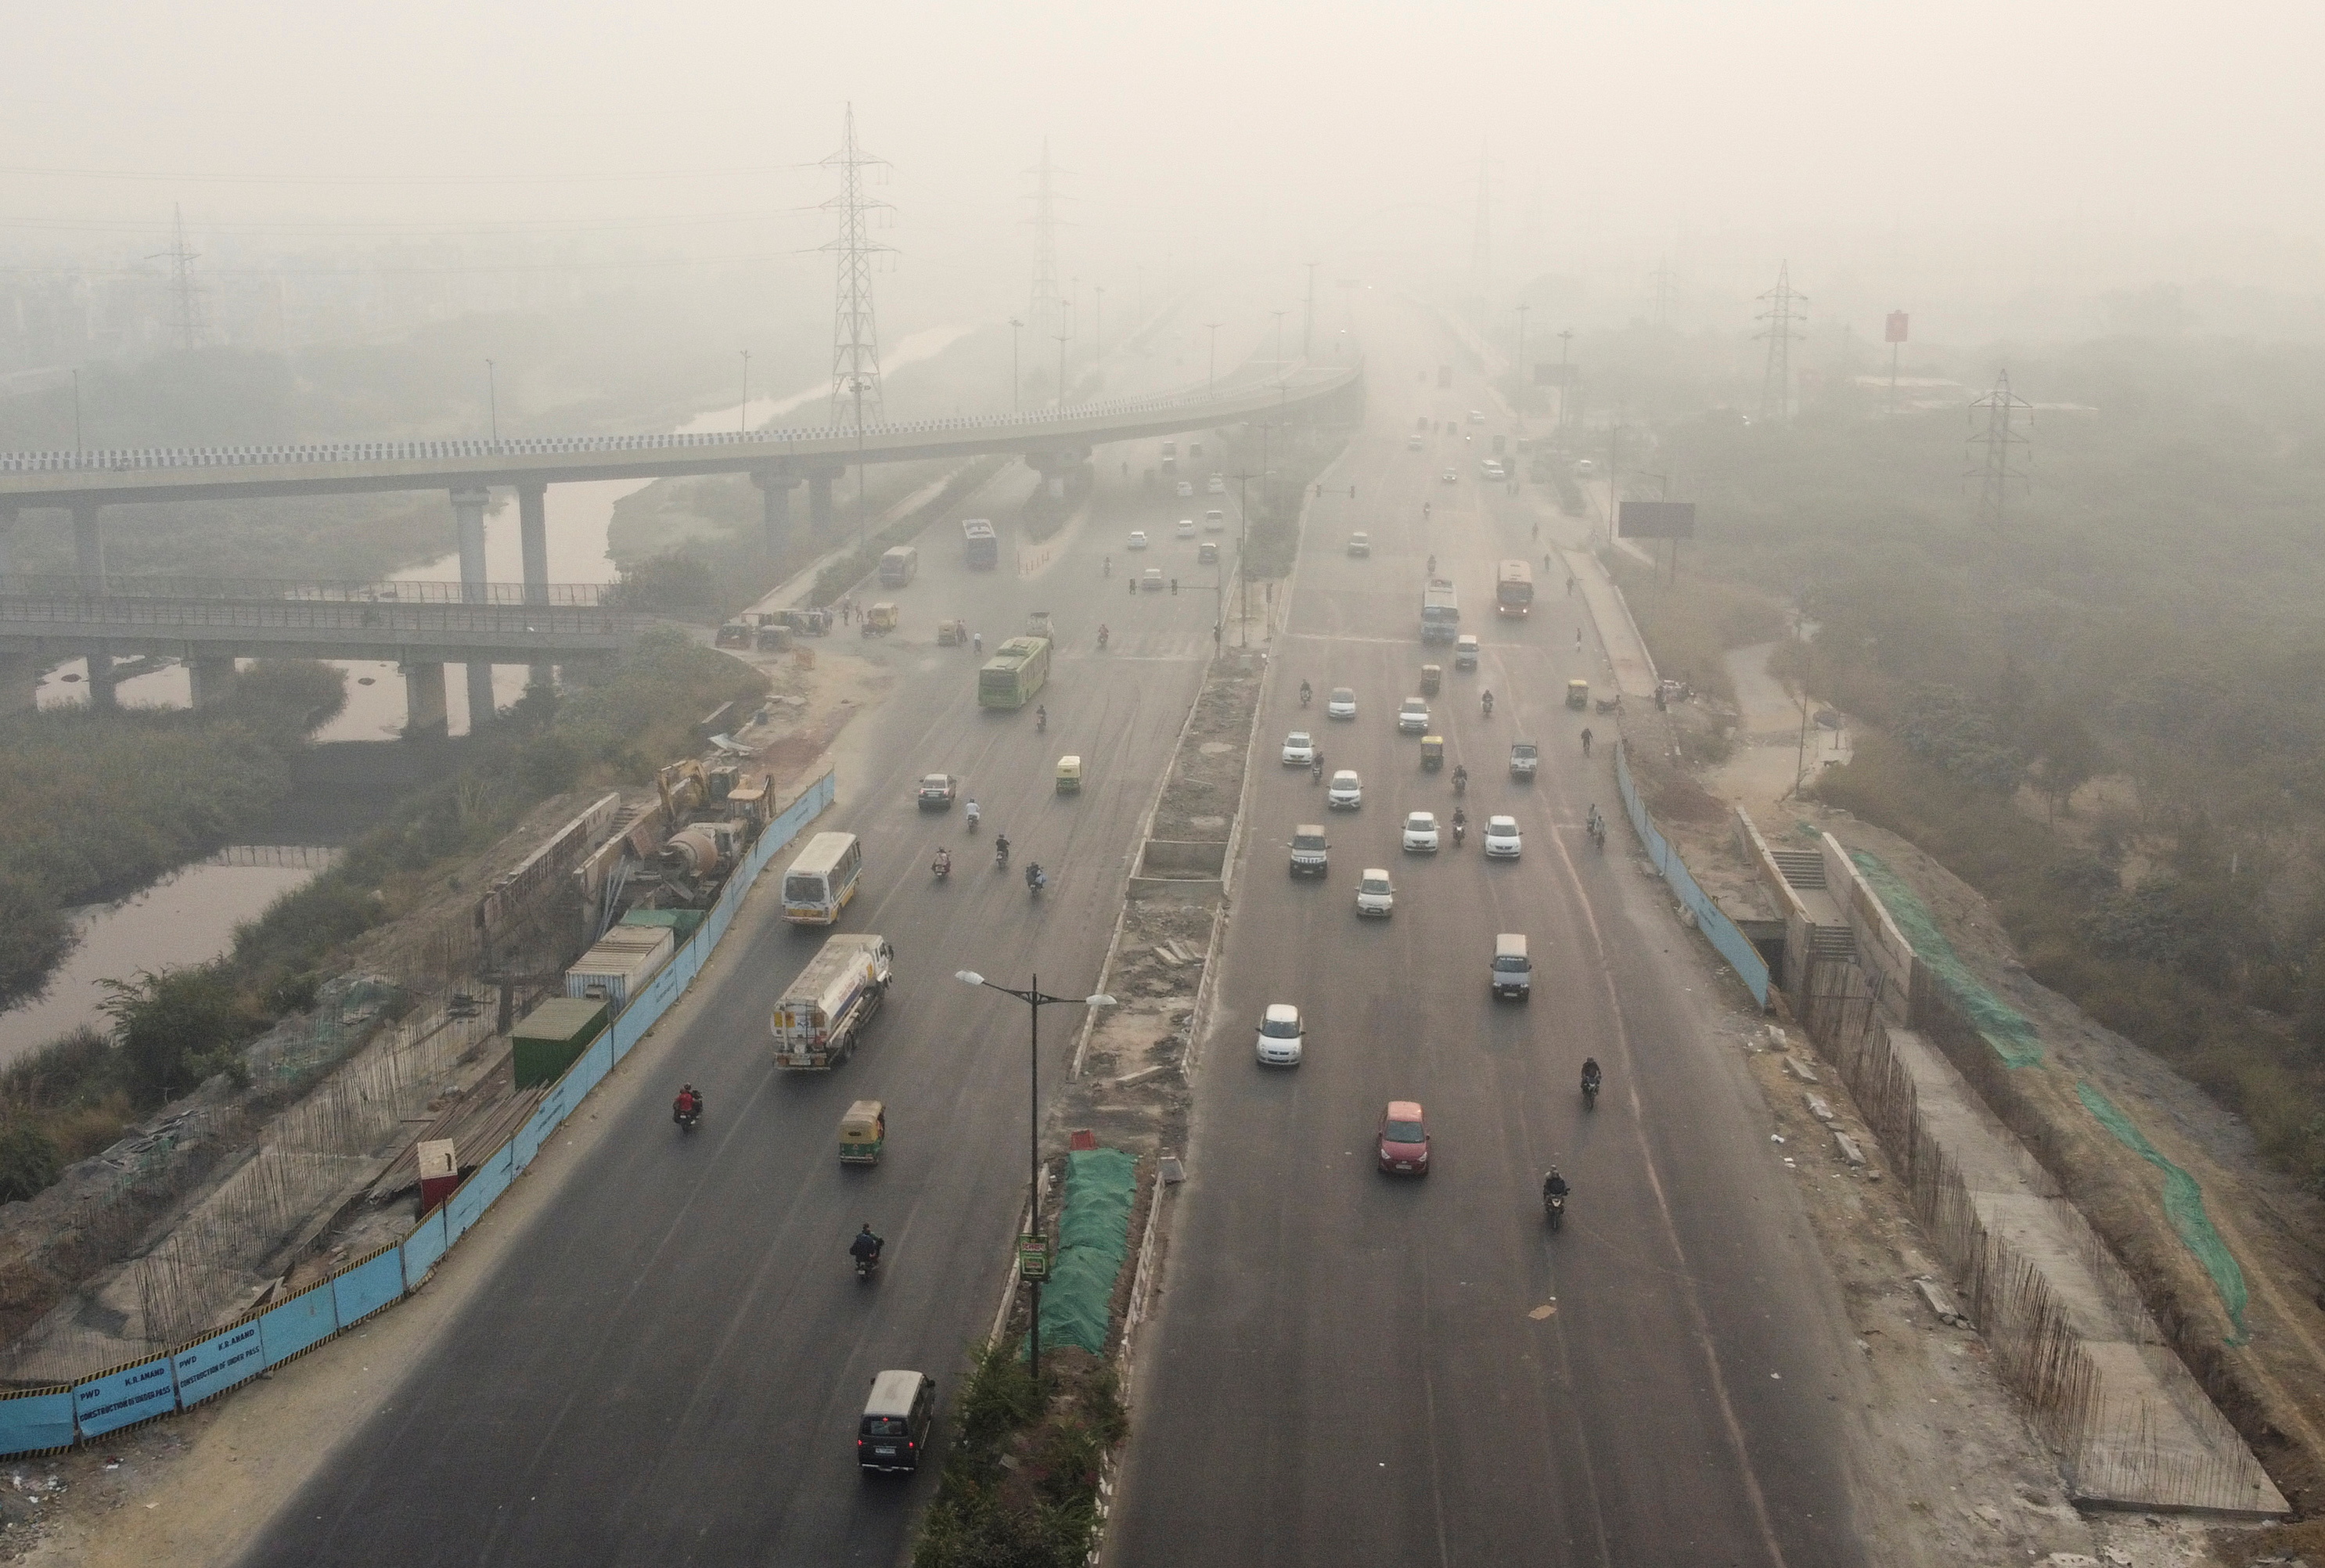 Traffic moves on a highway shrouded in smog in New Delhi